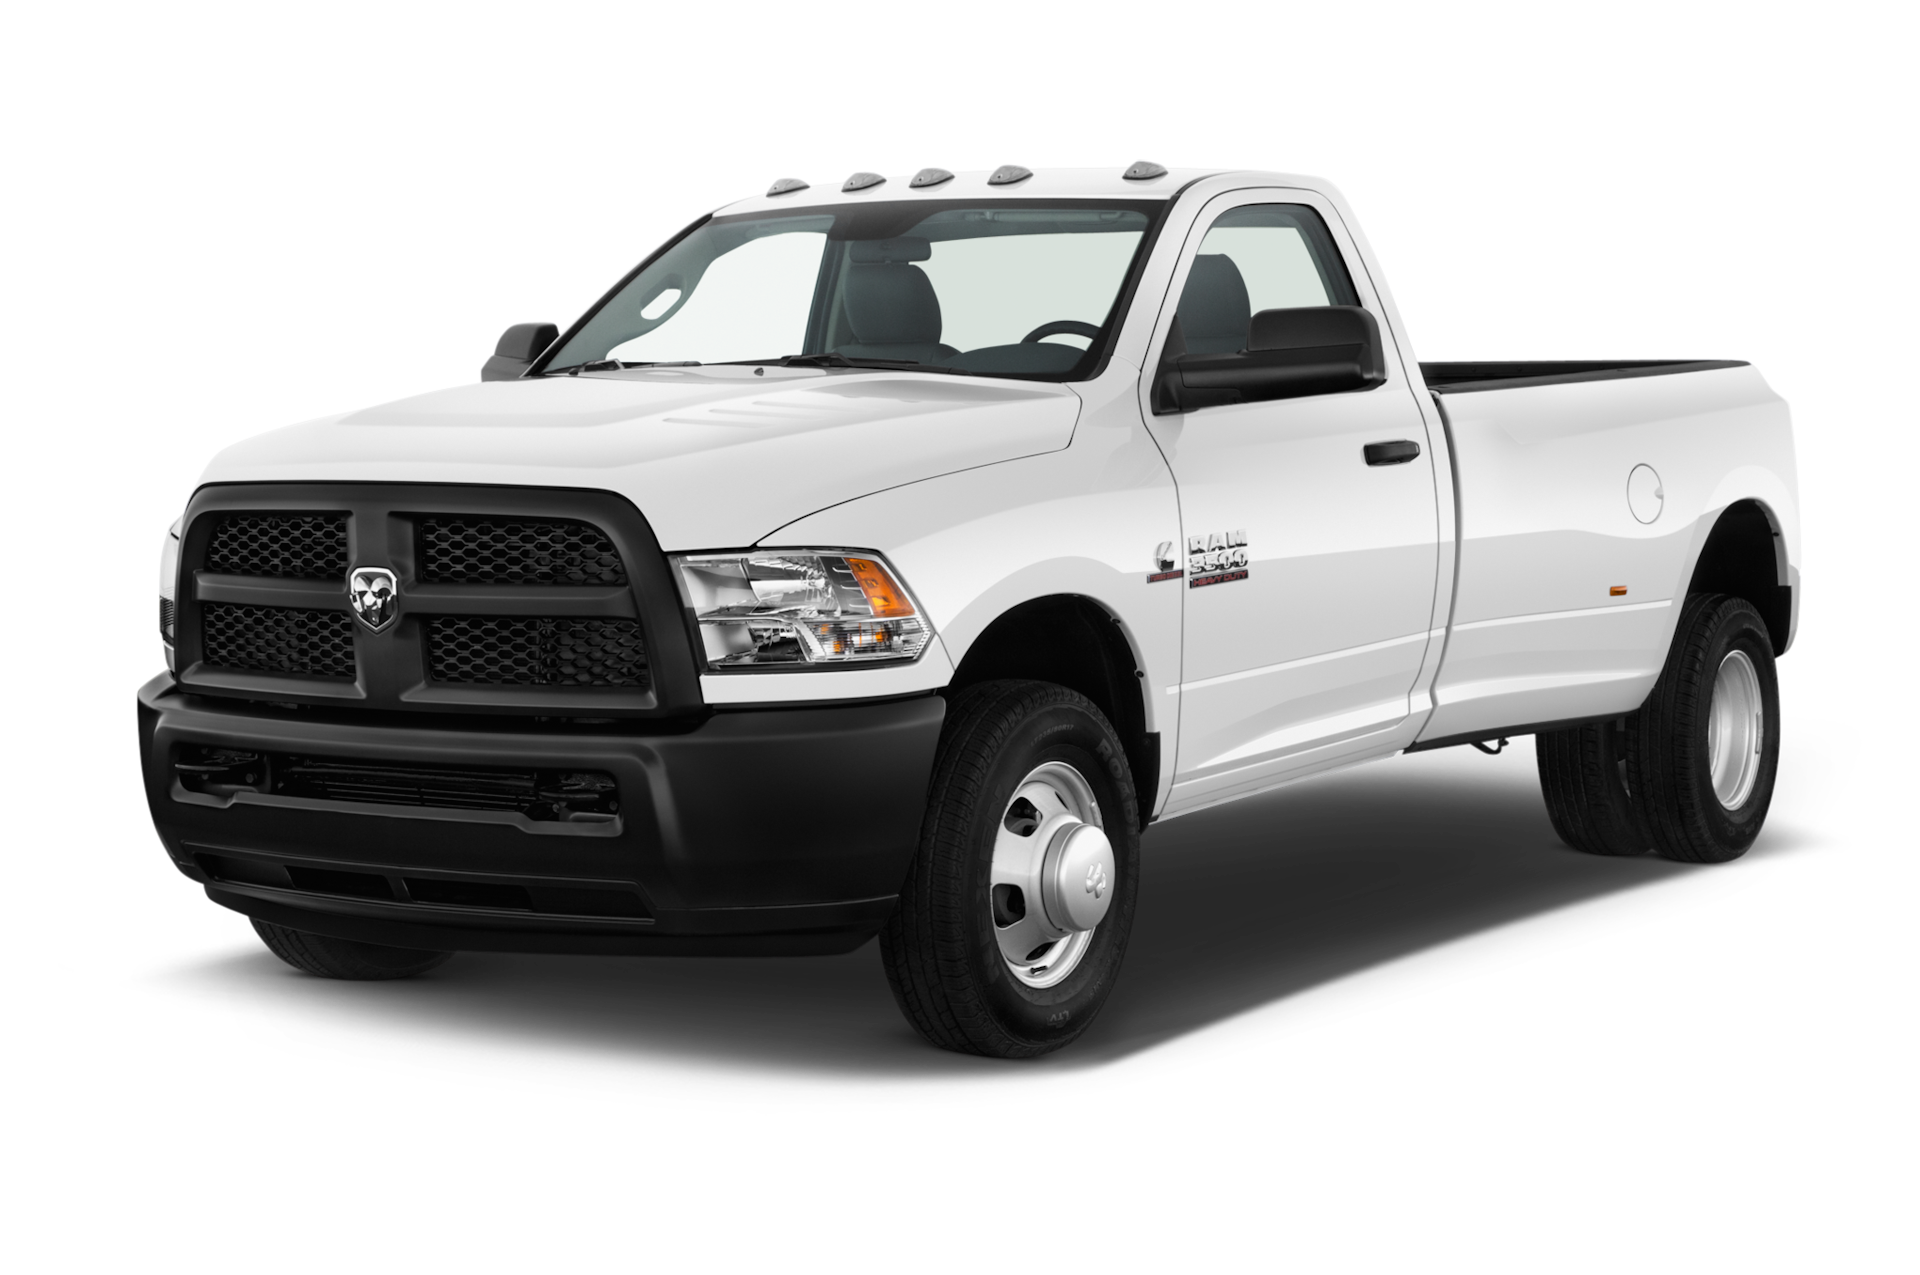 2017 Ram 3500 Prices, Reviews, and Photos - MotorTrend